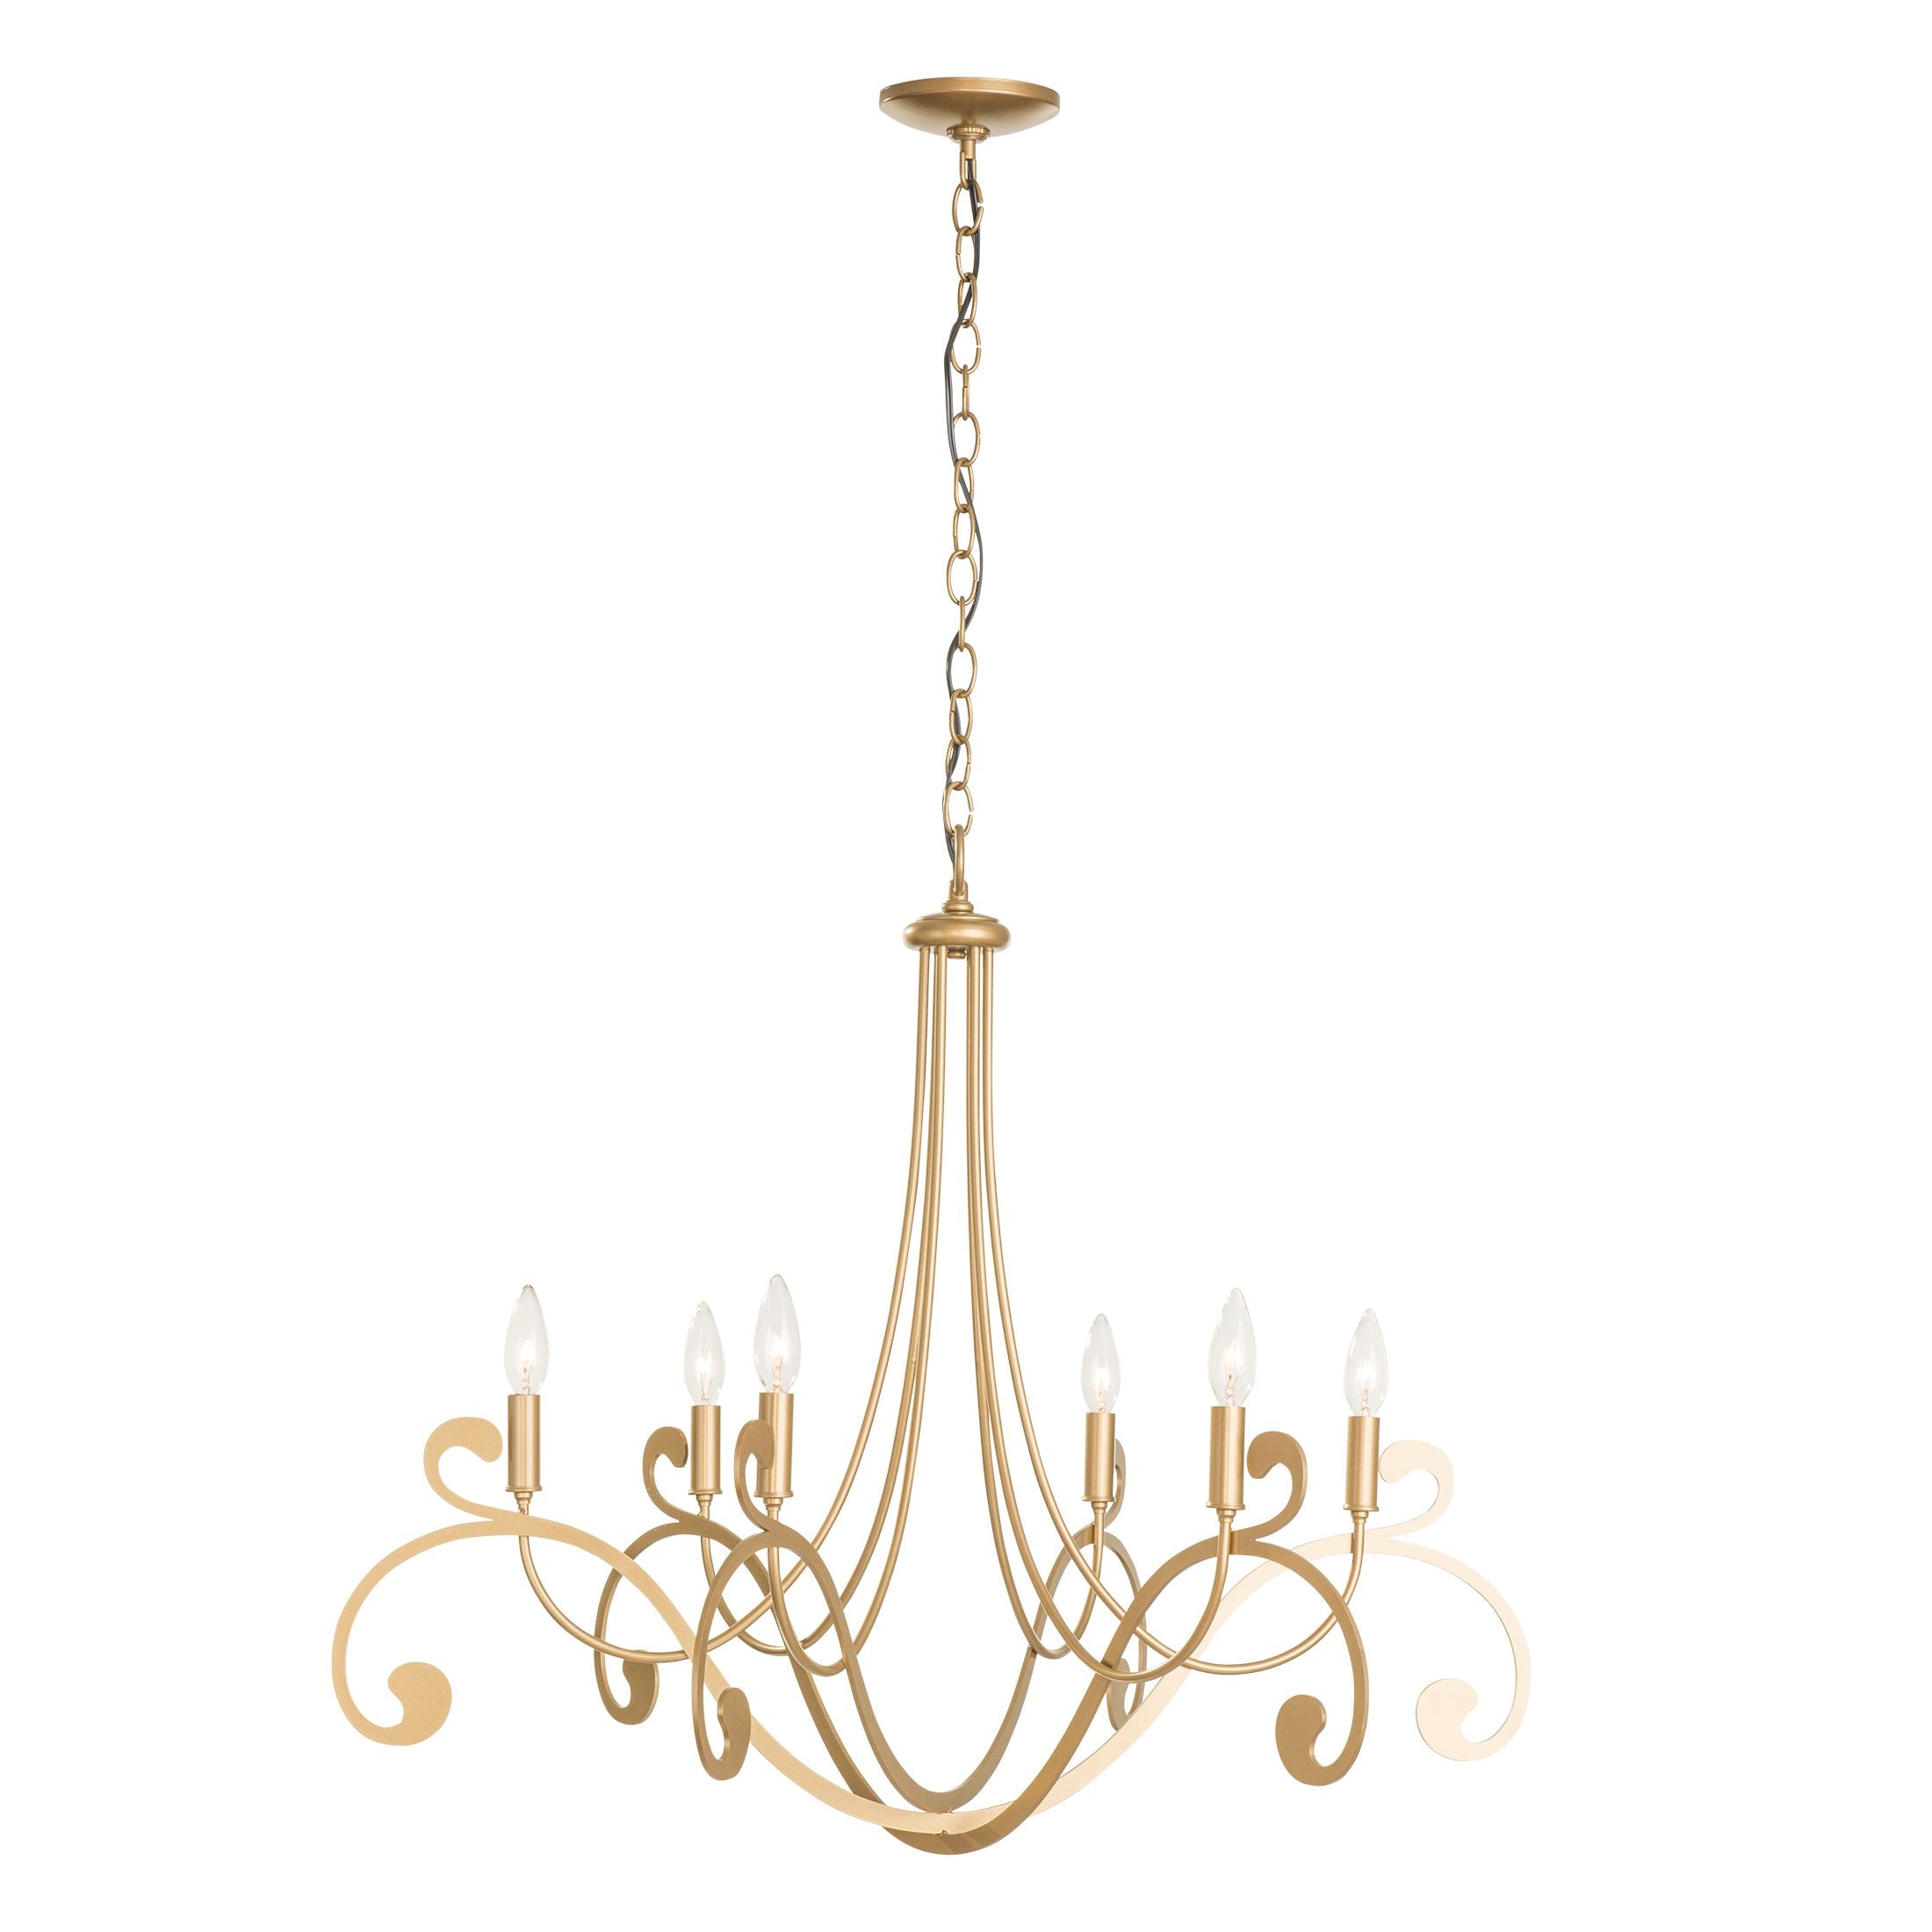 Bella 6 Arm Chandelier in gold finish from Synchronicity by Hubbardton Forge